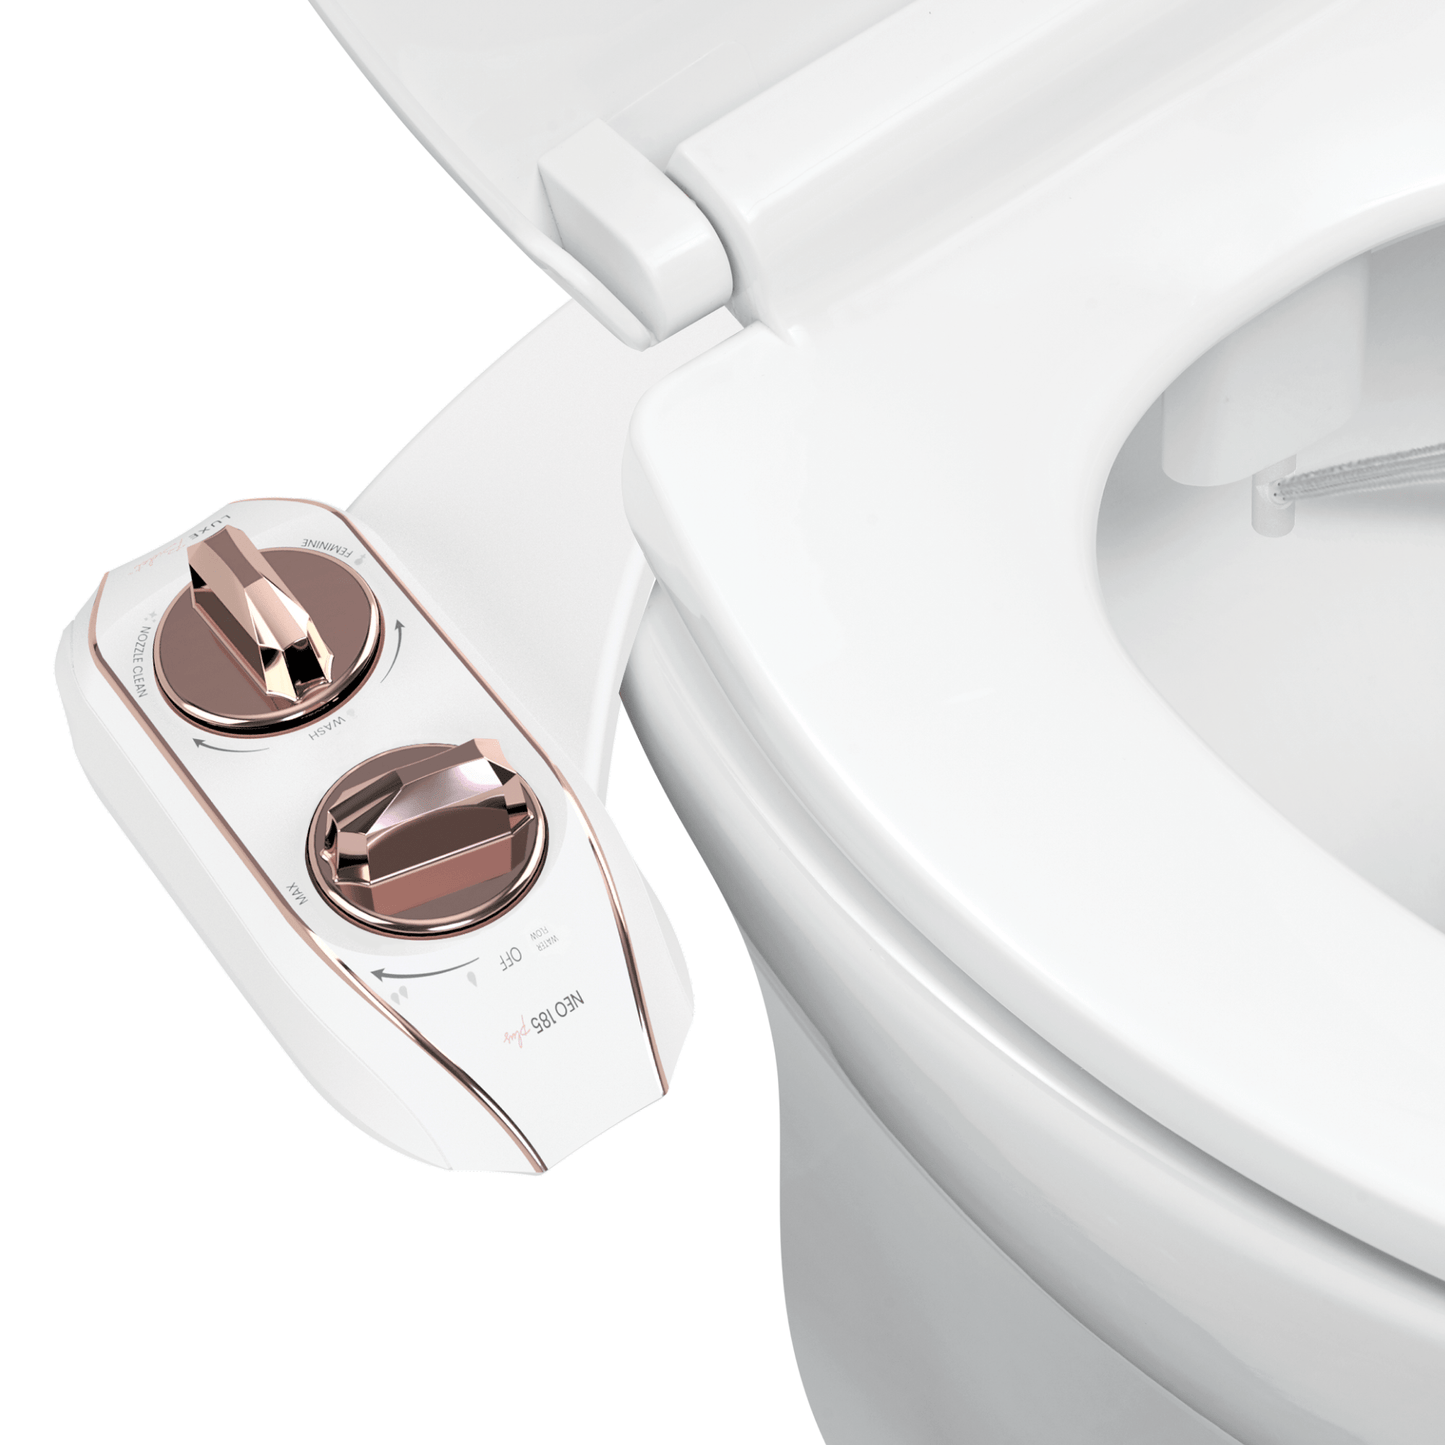 NEO 185 Plus Rose Gold installed on a toilet with water spraying from nozzles